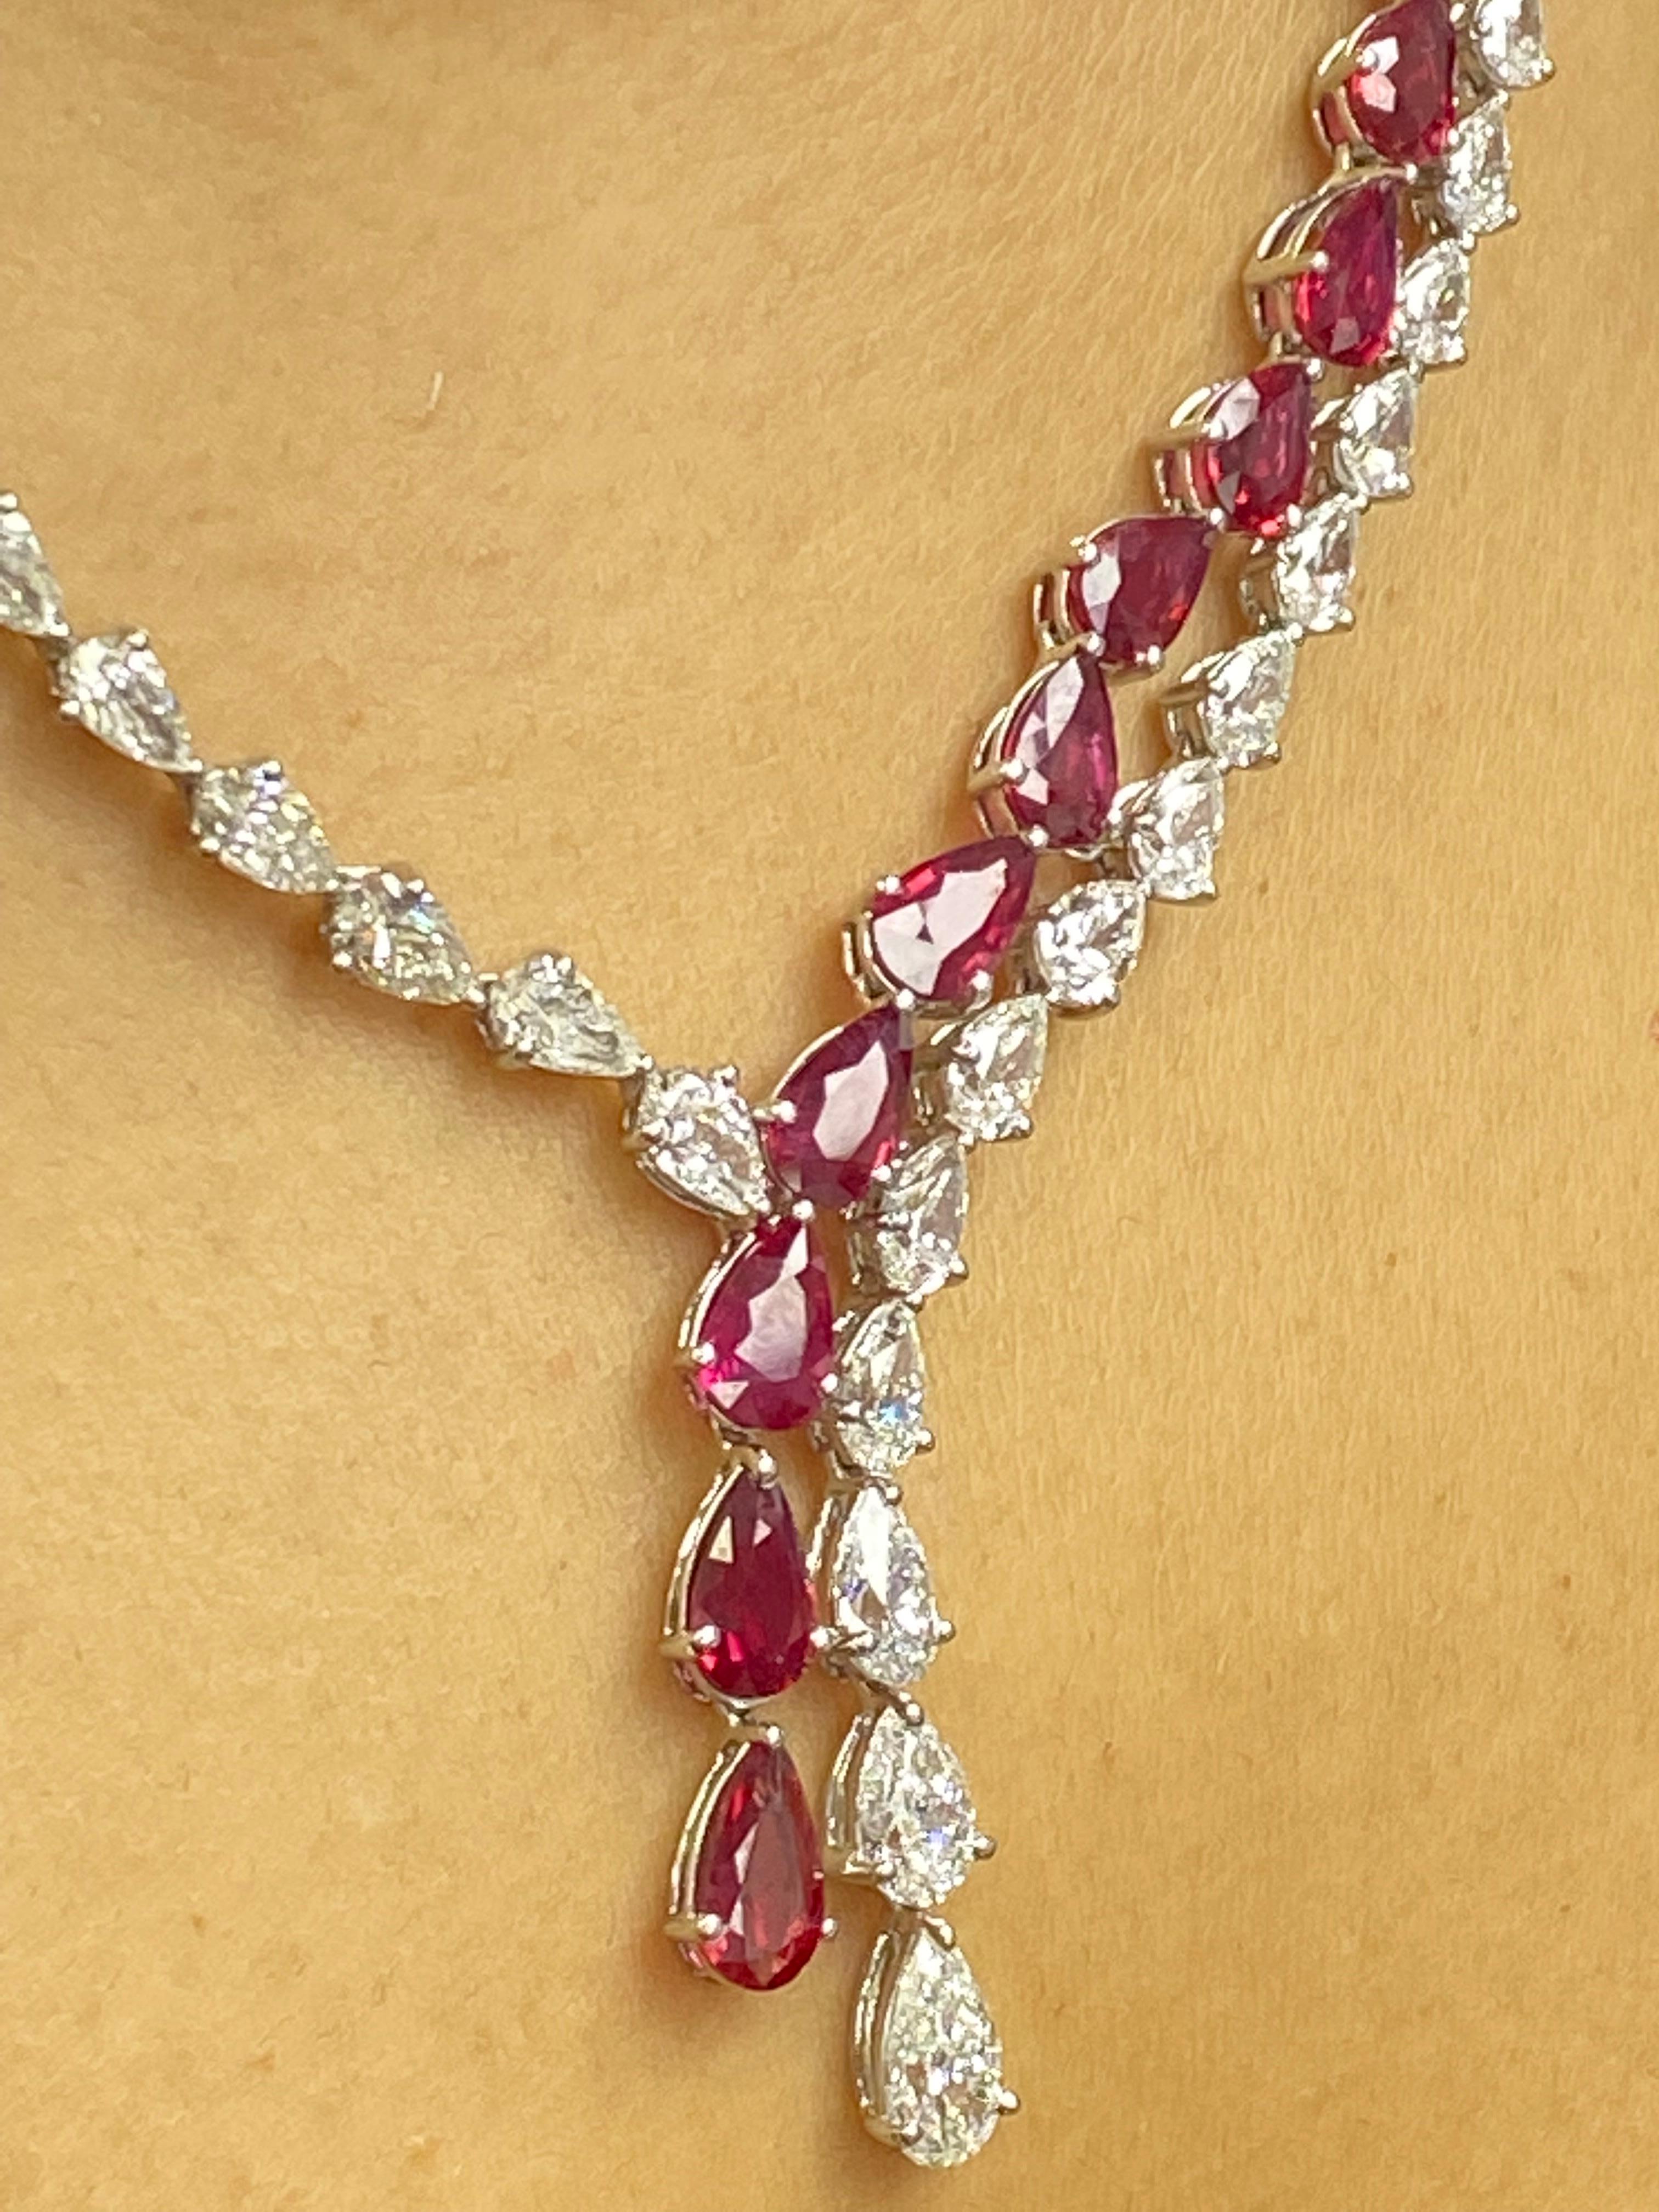 Certified 20.62 Carat Pear Shape Ruby and Diamond Drop Necklace in Platinum For Sale 4